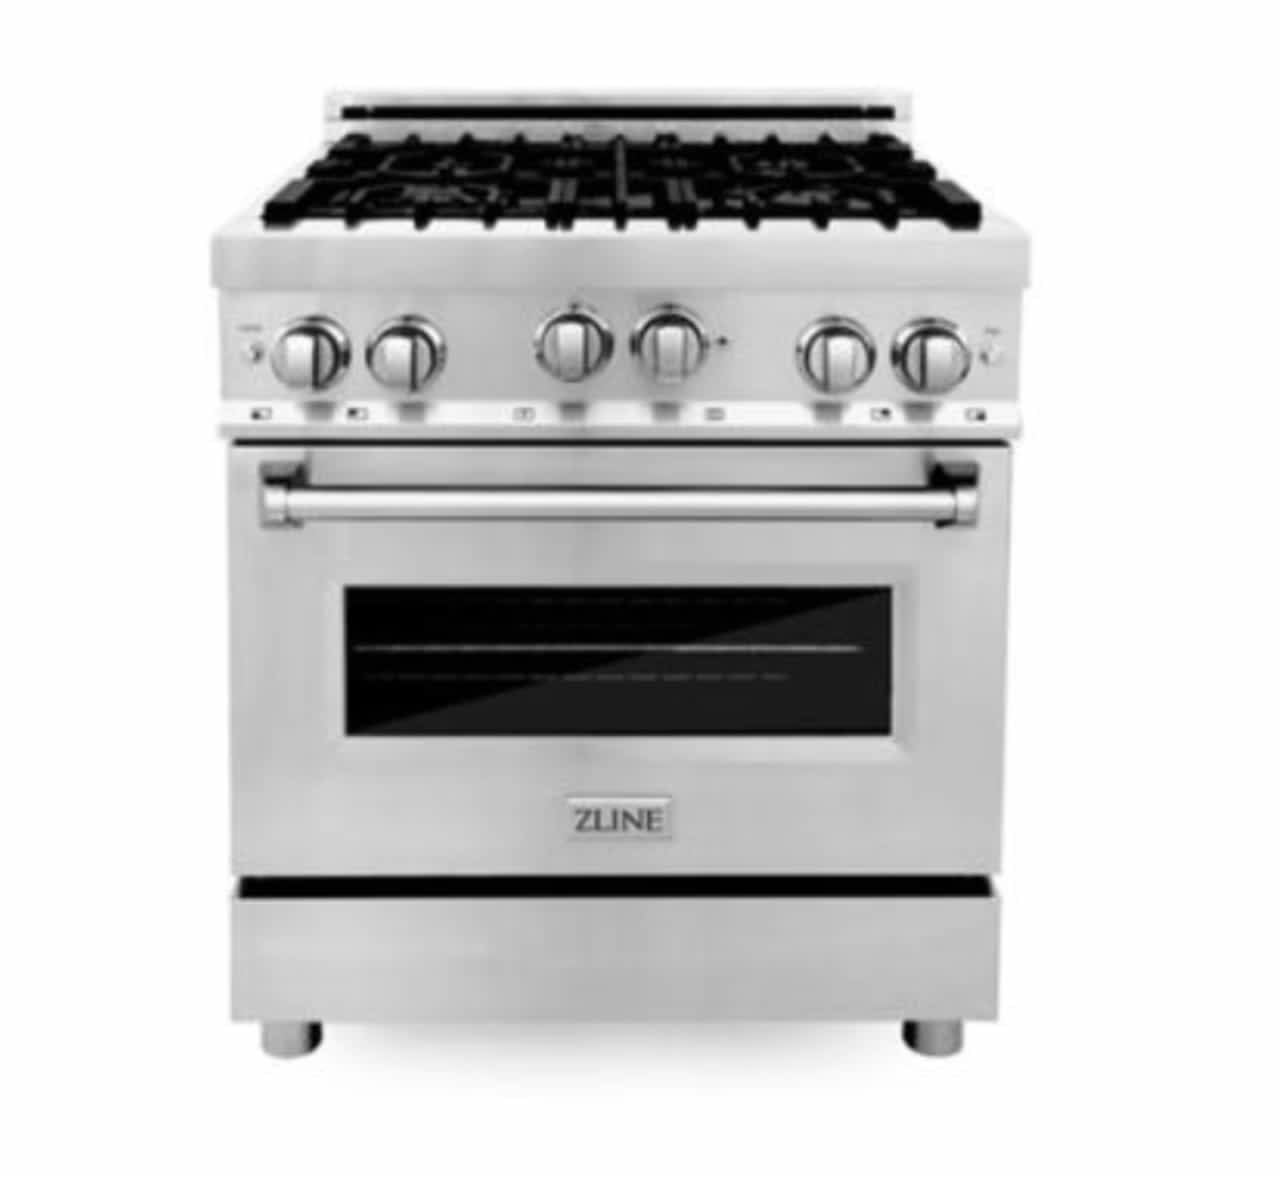 ZLINE announced on Thursday, Jan. 26 that an earlier recall announced late in December has now been expanded to include a total of 30,000 30-inch, 36-inch, and 48-inch RG gas ranges.